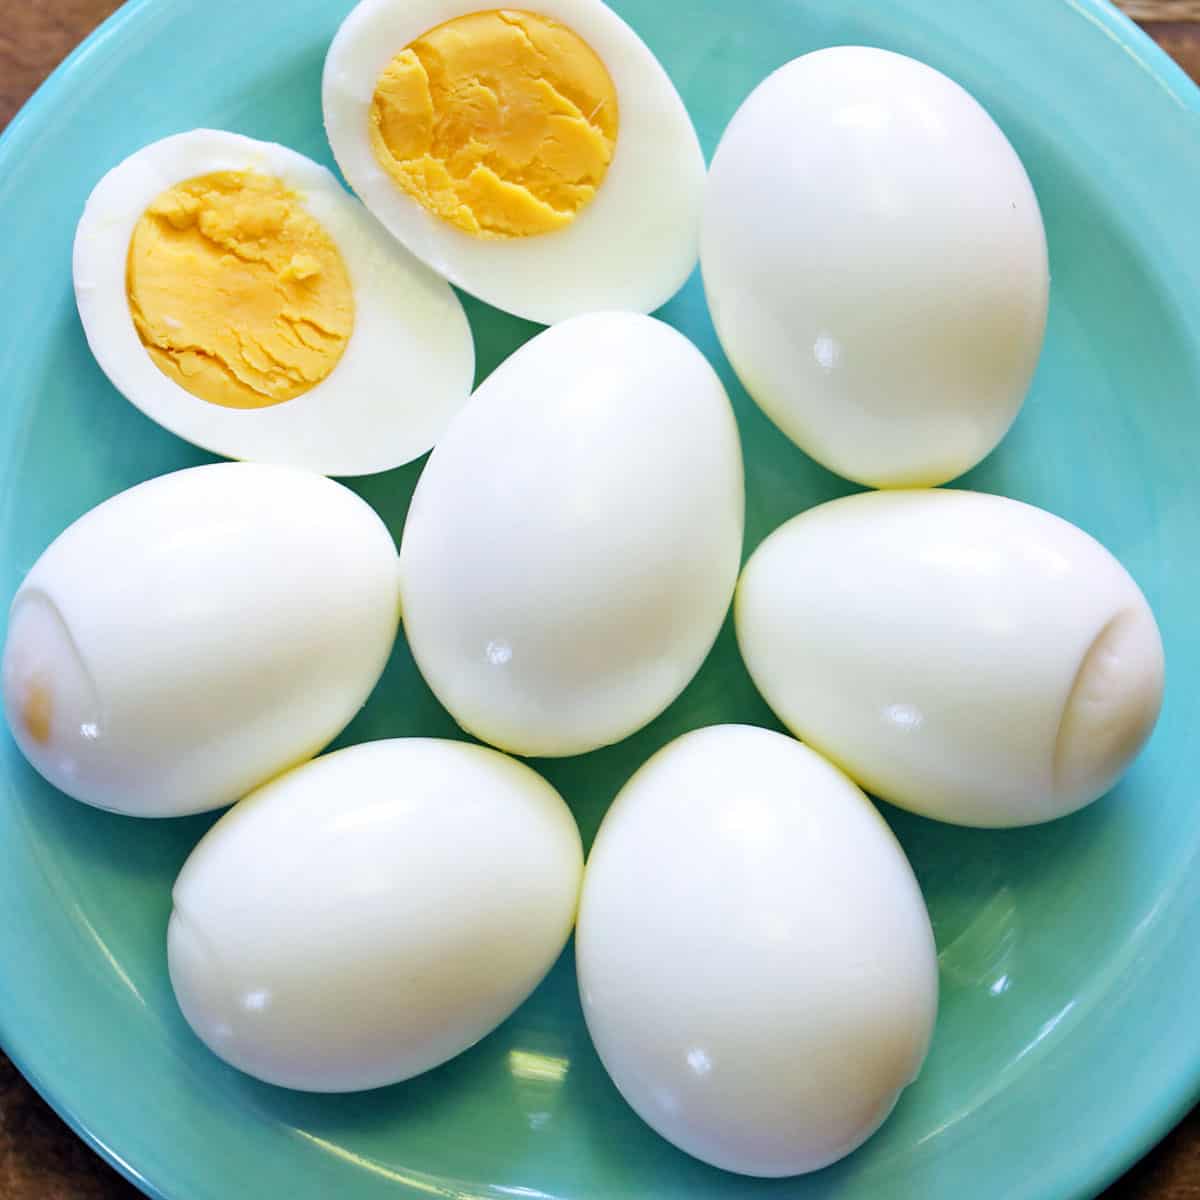 Hard-boiled eggs served on a turquoise plate.